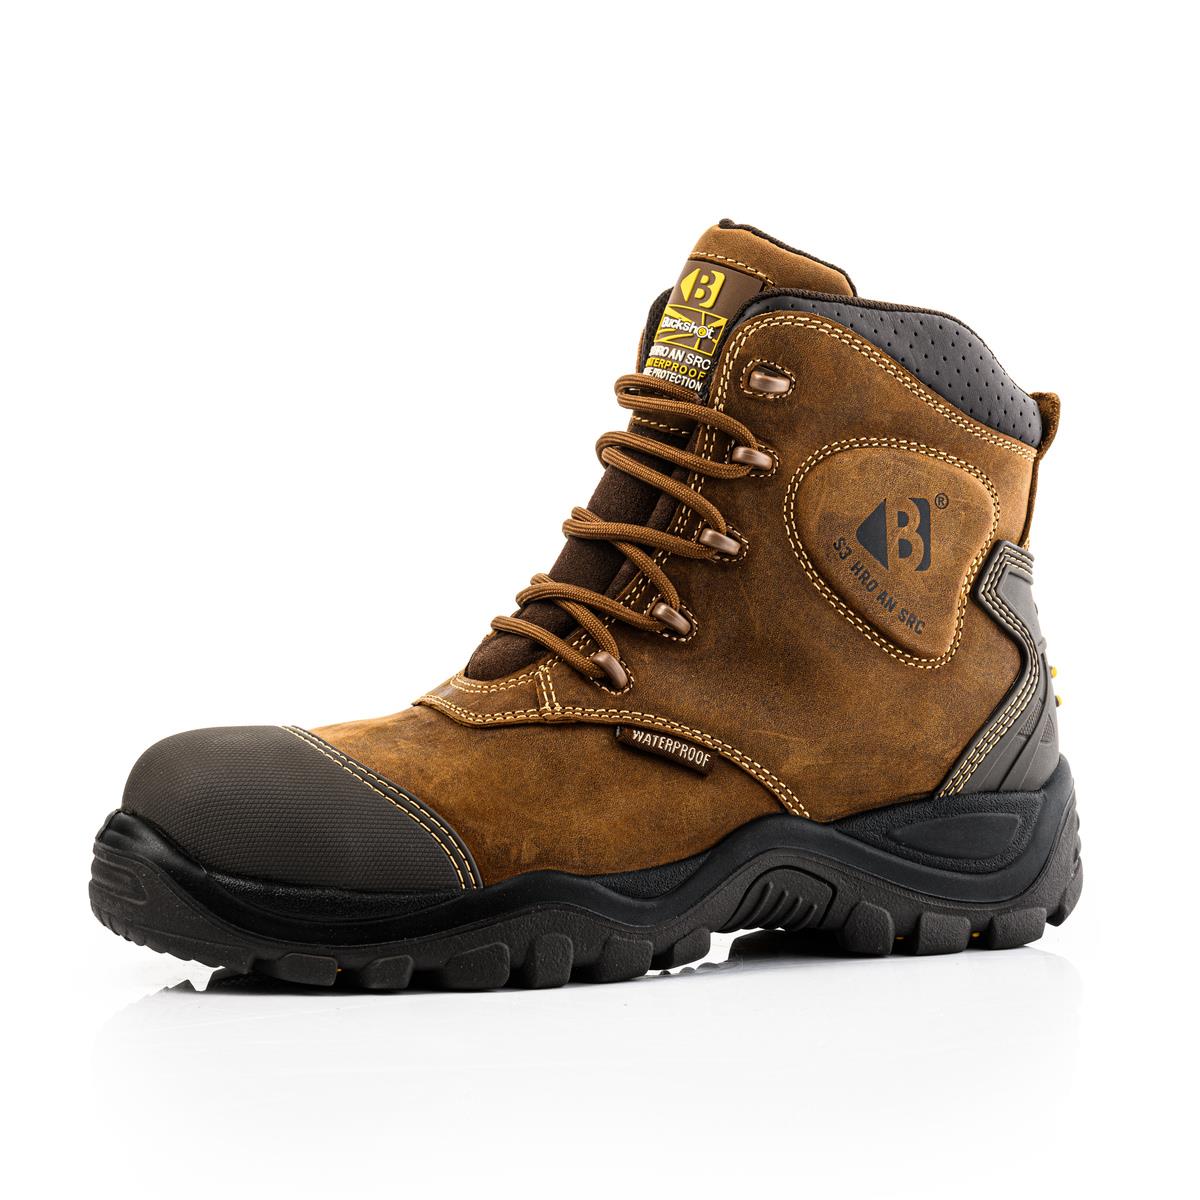 Buckbootz S3 brown ankle protection waterproof composite toe/midsole work safety boot #BSH012